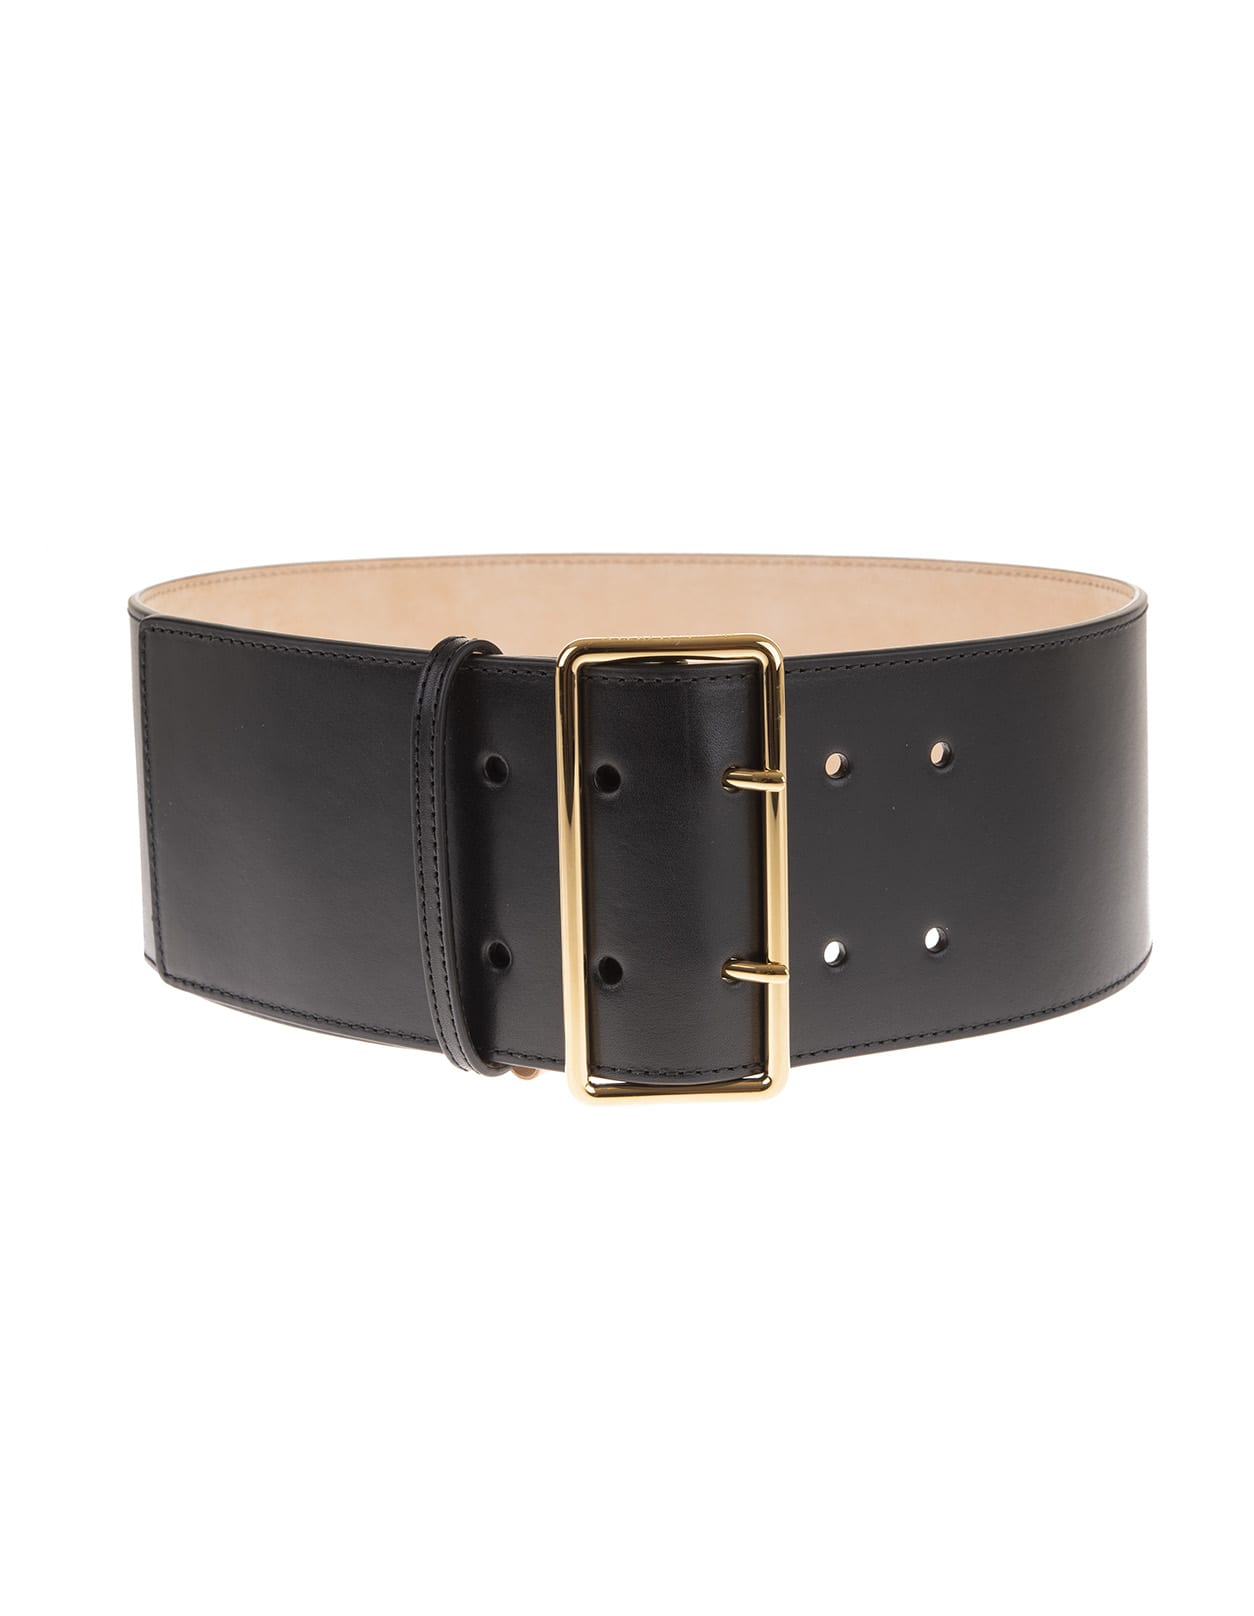 Alexander McQueen Woman Black Smooth Leather Belt With Maxi Golden Buckle